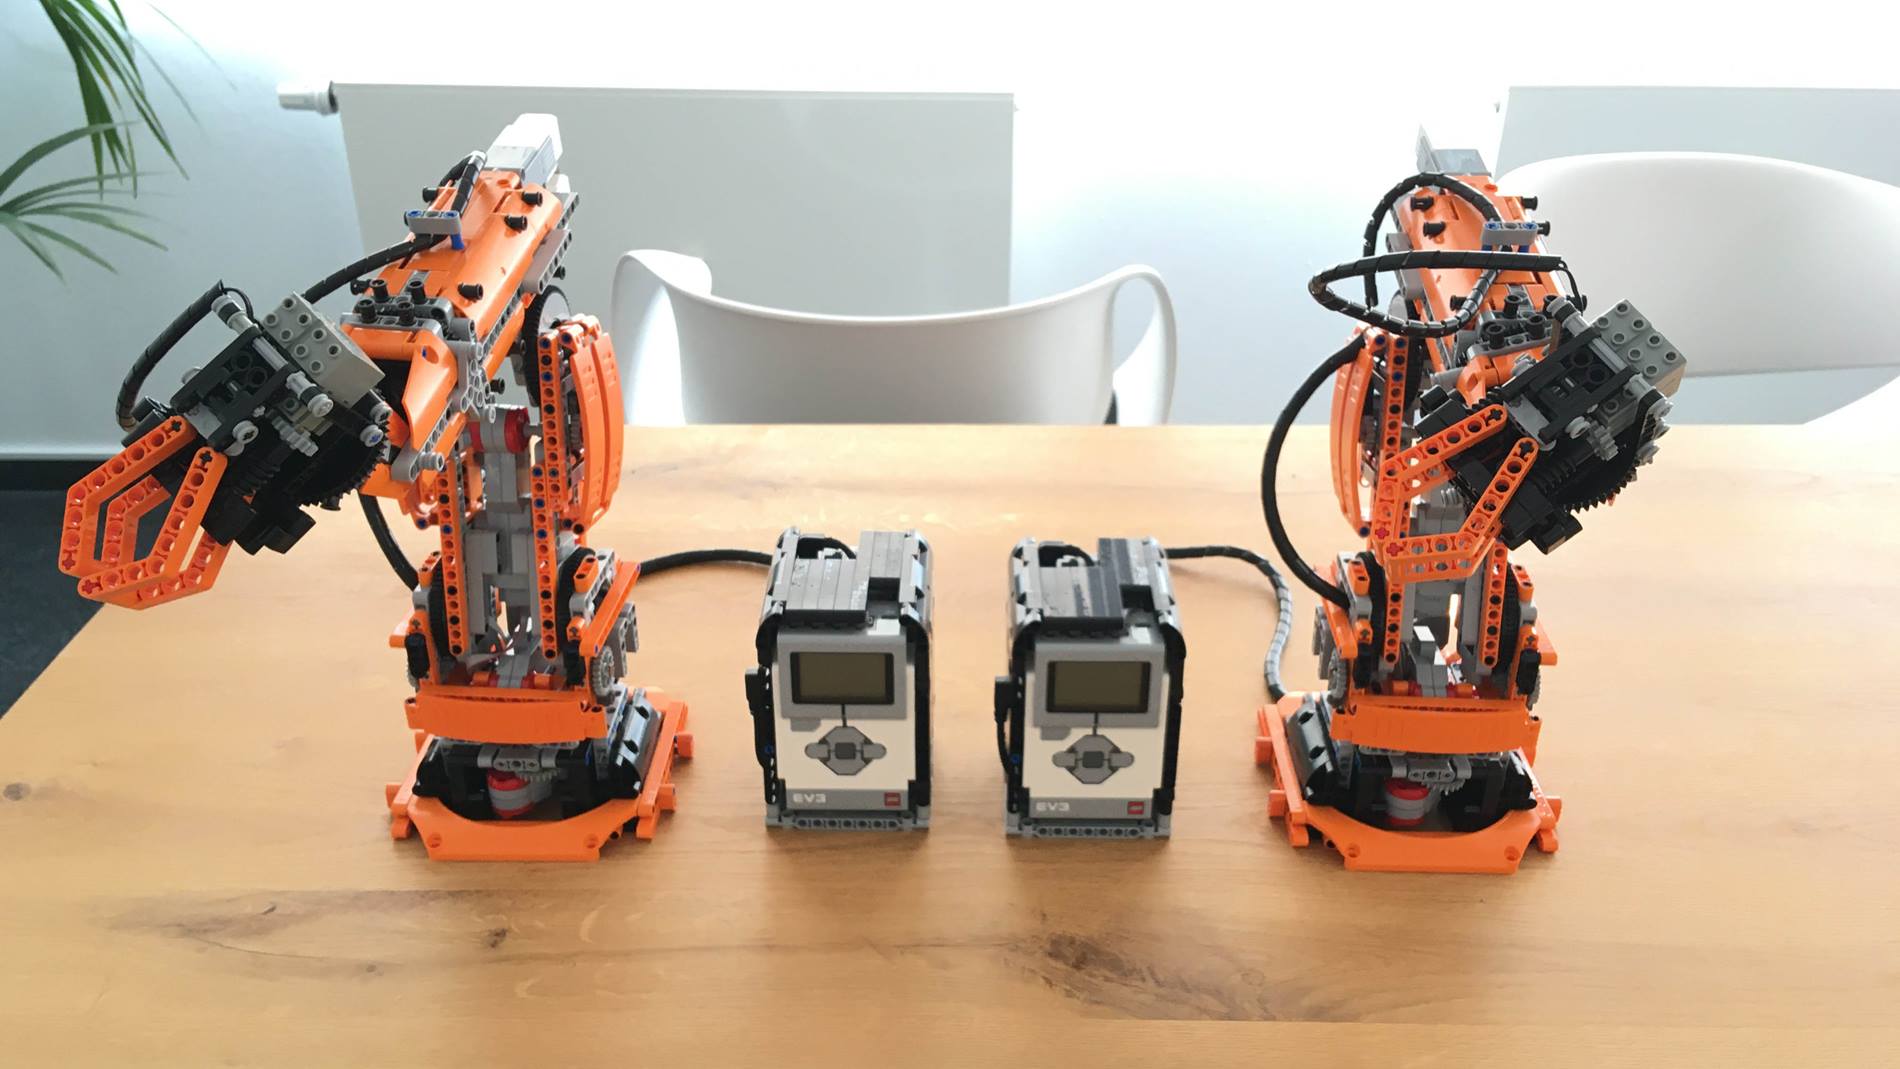 Billy komponent tørst Learning how to program easily using a building block robot | KUKA AG